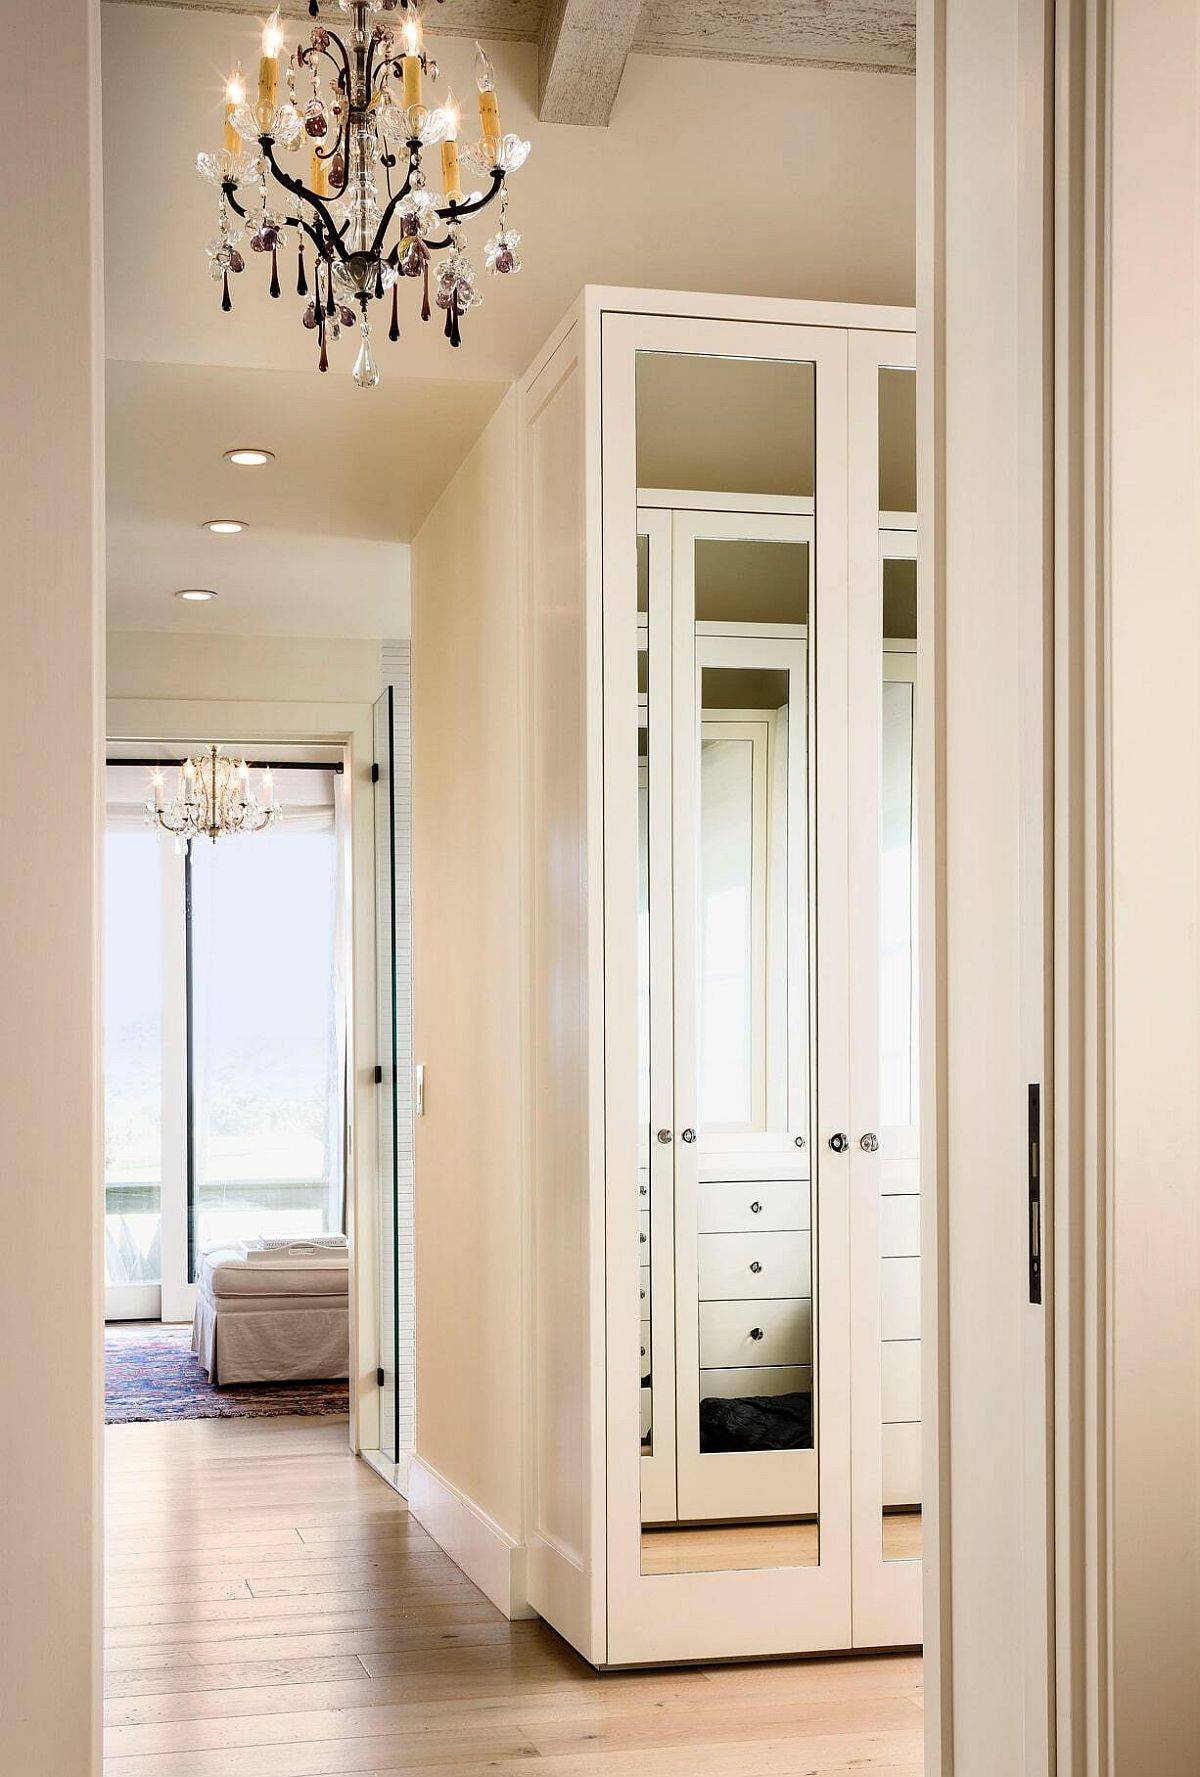 Mirrored-millwork-throughout-the-house-helps-in-creatinga-more-cheerful-beach-style-20594